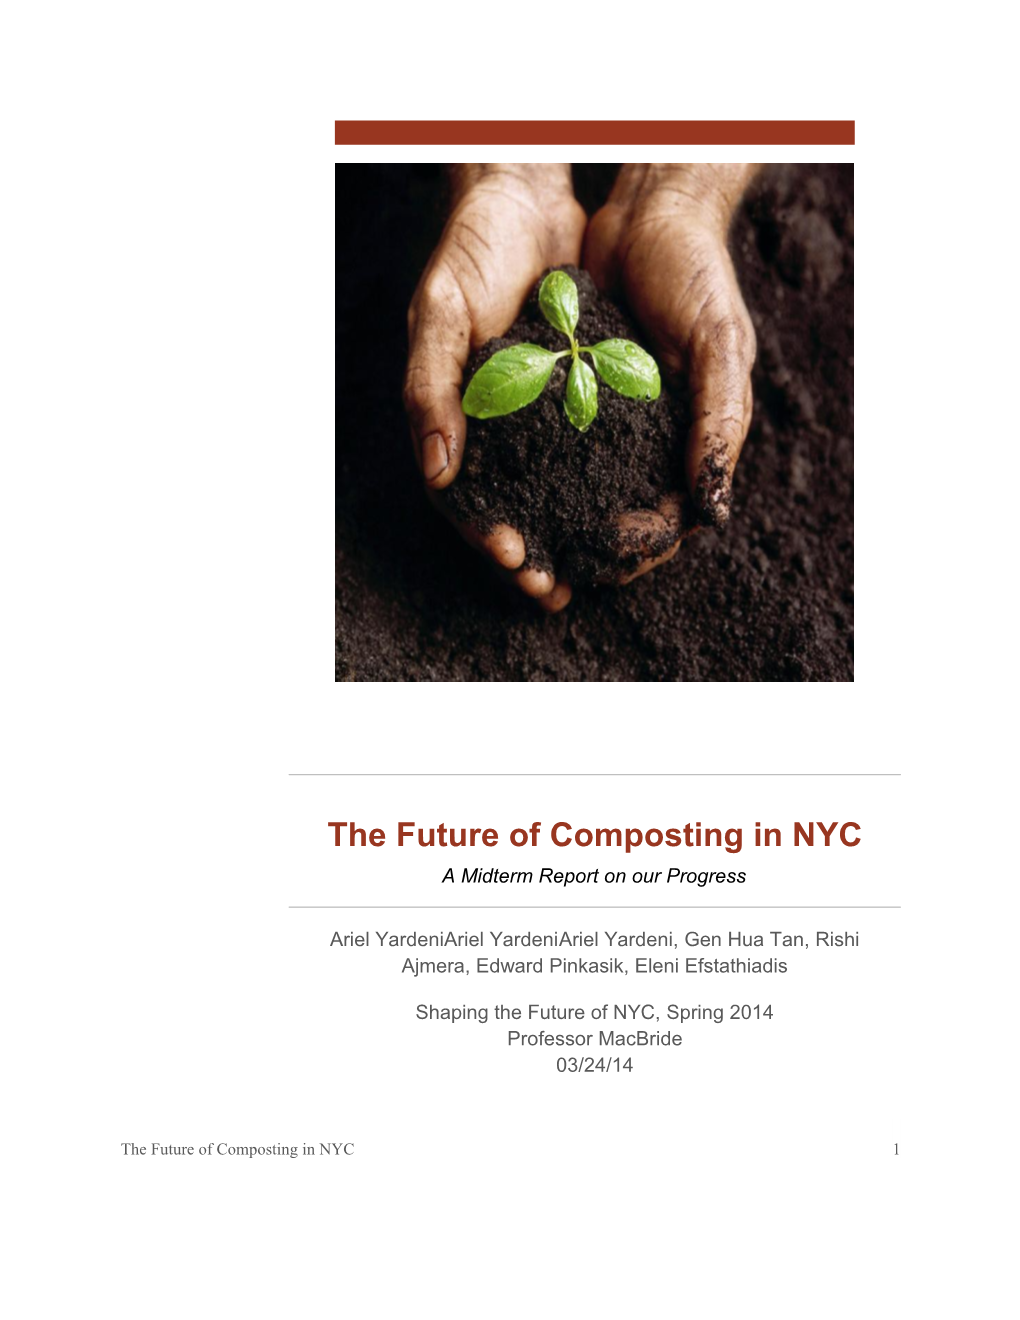 The Future of Composting in NYC